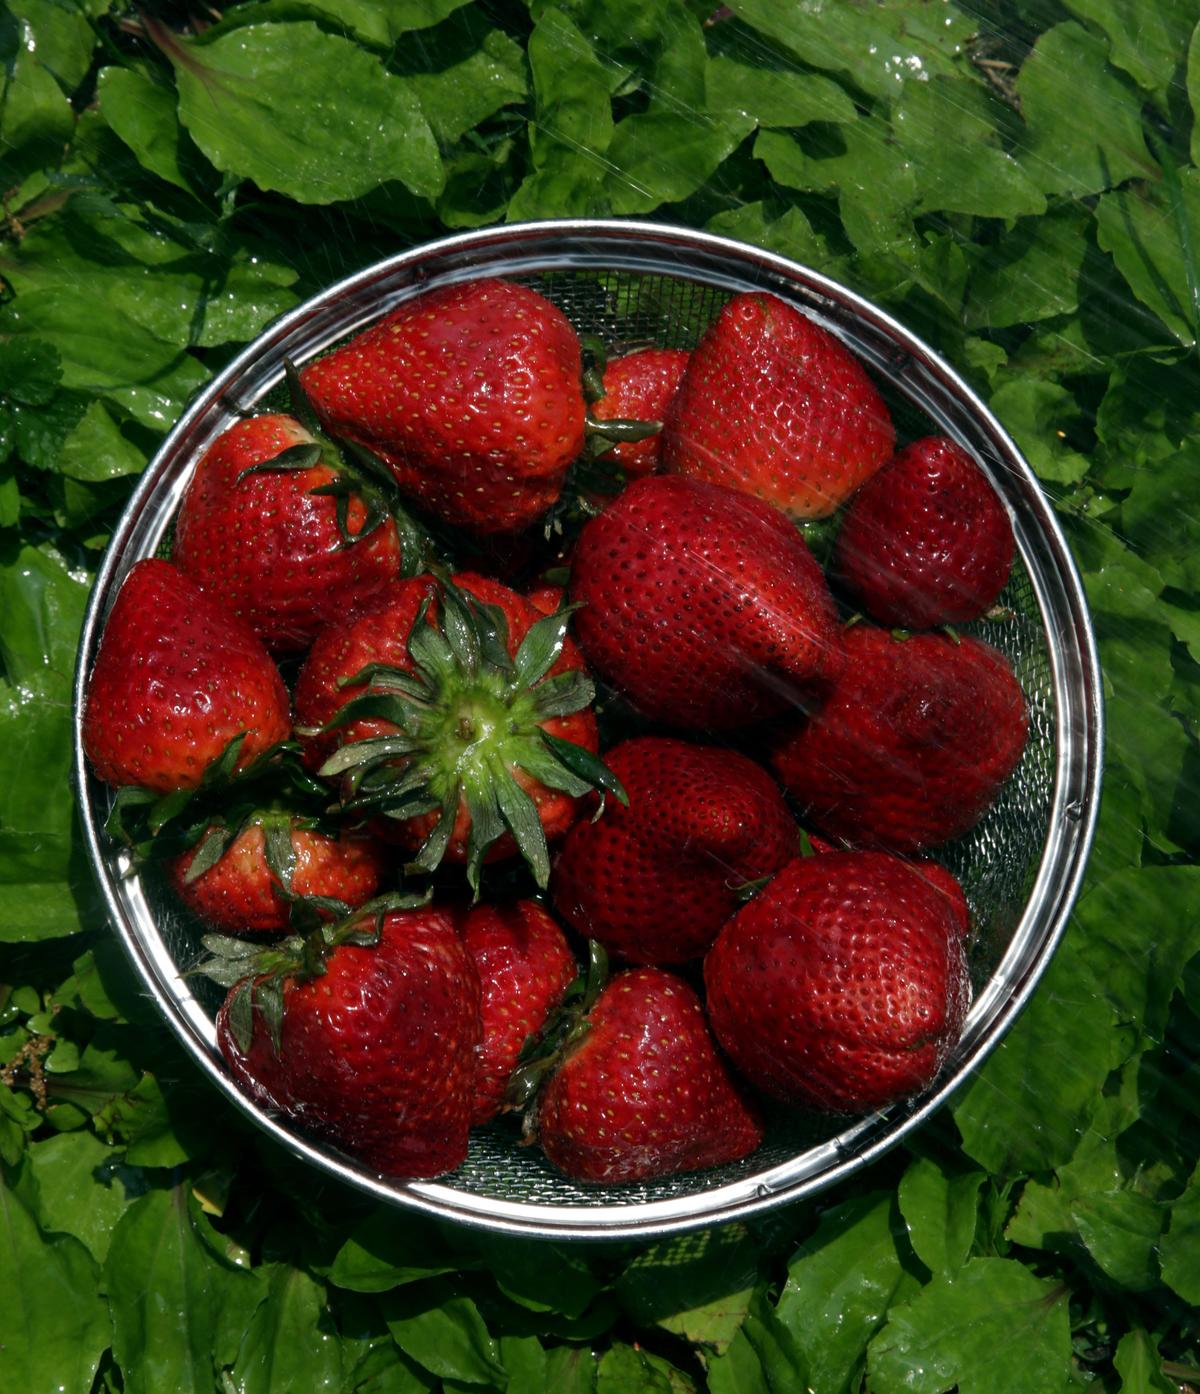 Fresh strawberries, local and otherwise, are in season now, Wednesday, May 11, 2022. (Hillary Levin/St. Louis Post-Dispatch/TNS)